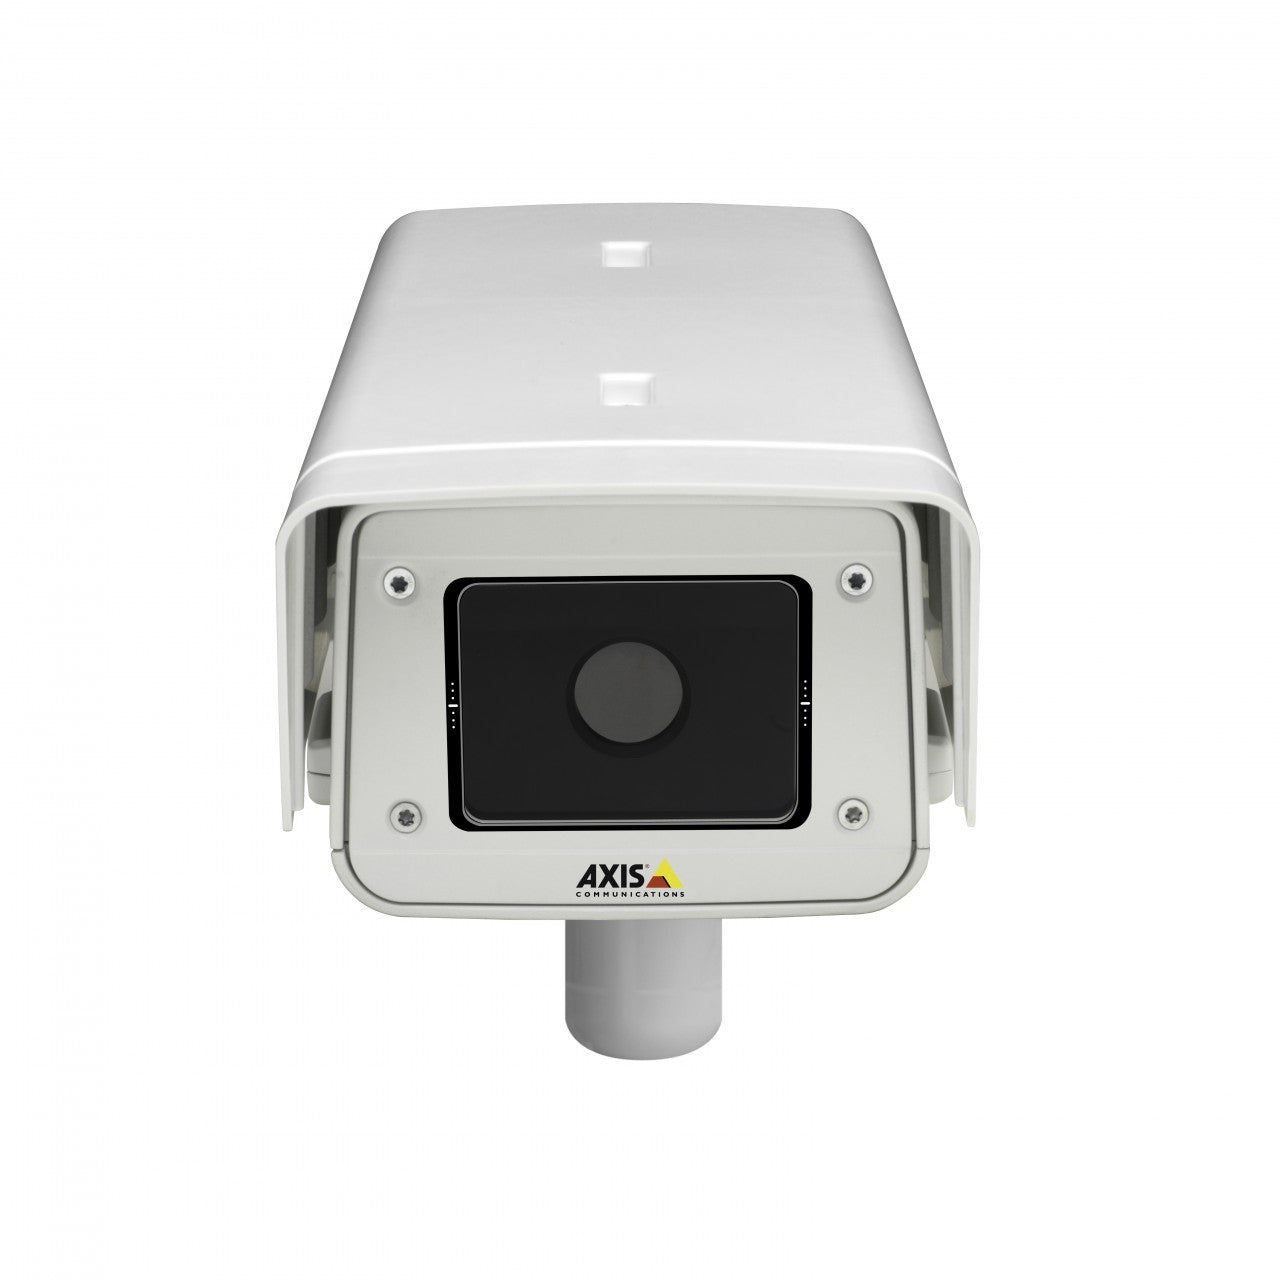 AXIS Q1921-E (0385-001) Thermal Network Camera